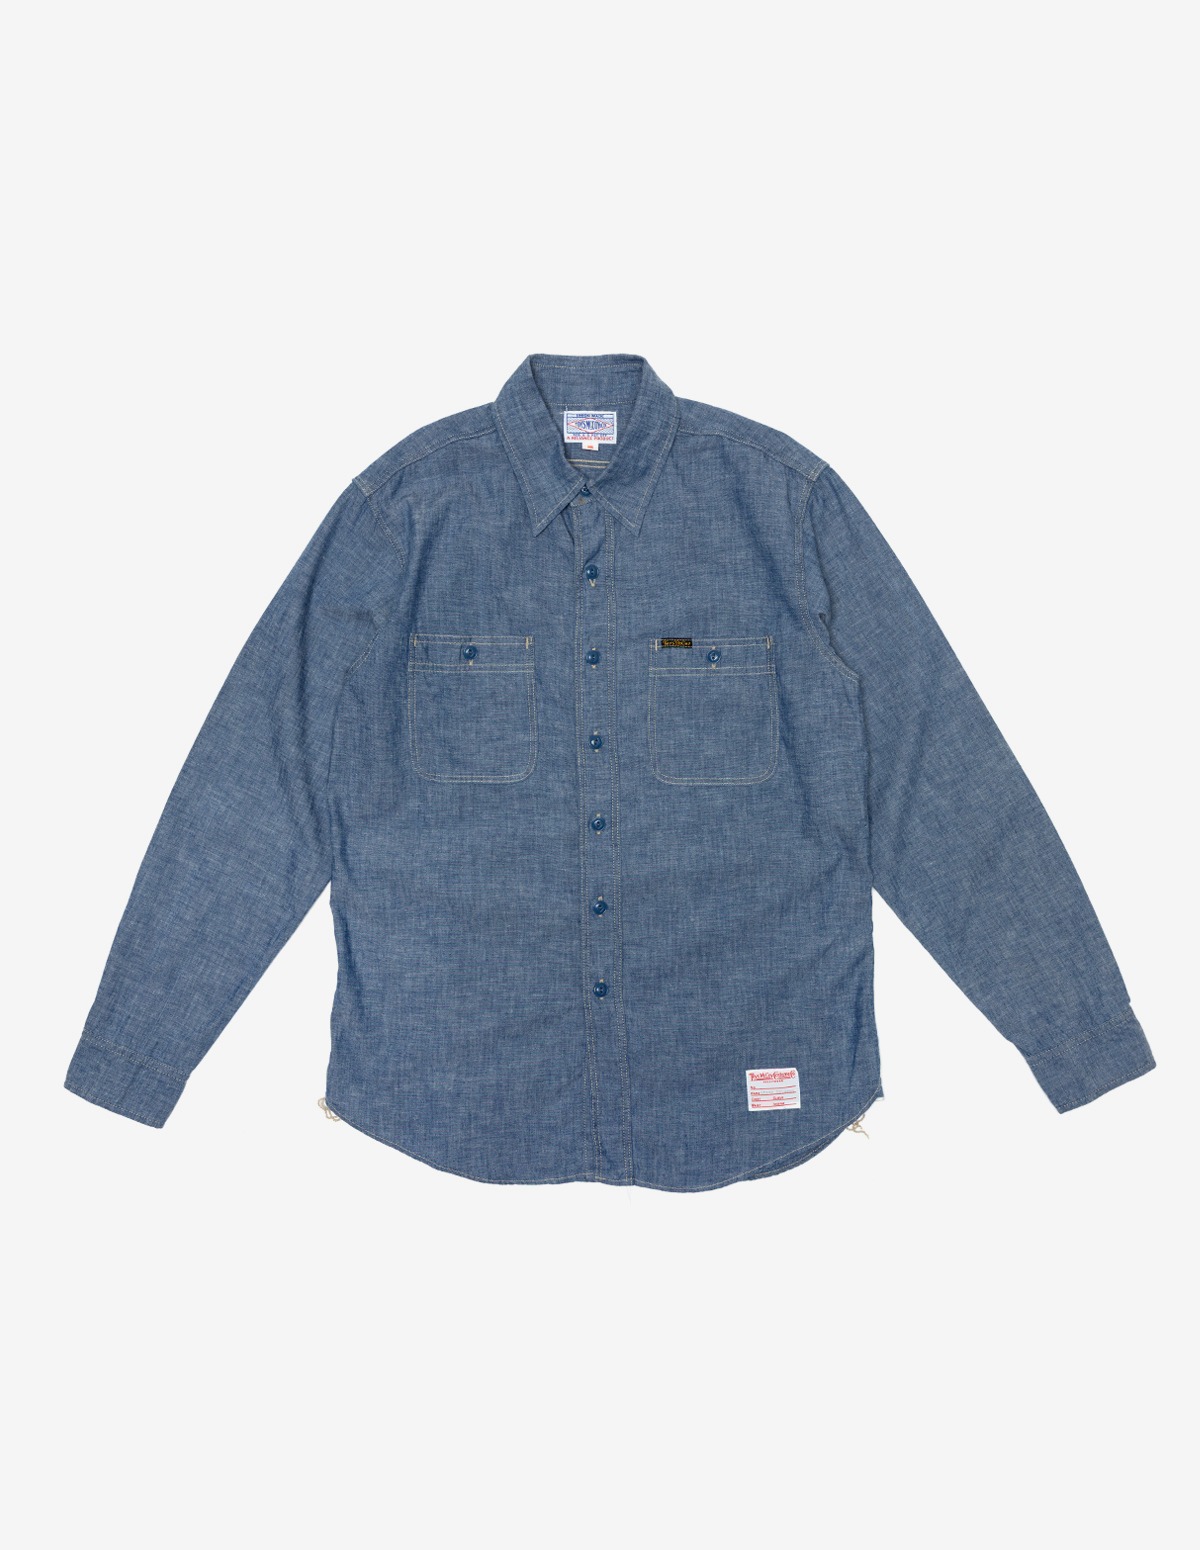 TMS2308 TOYS McCOY &amp; CO. CHAMBRAY WORK SHIRT &quot;STEVE McQUEEN&quot;